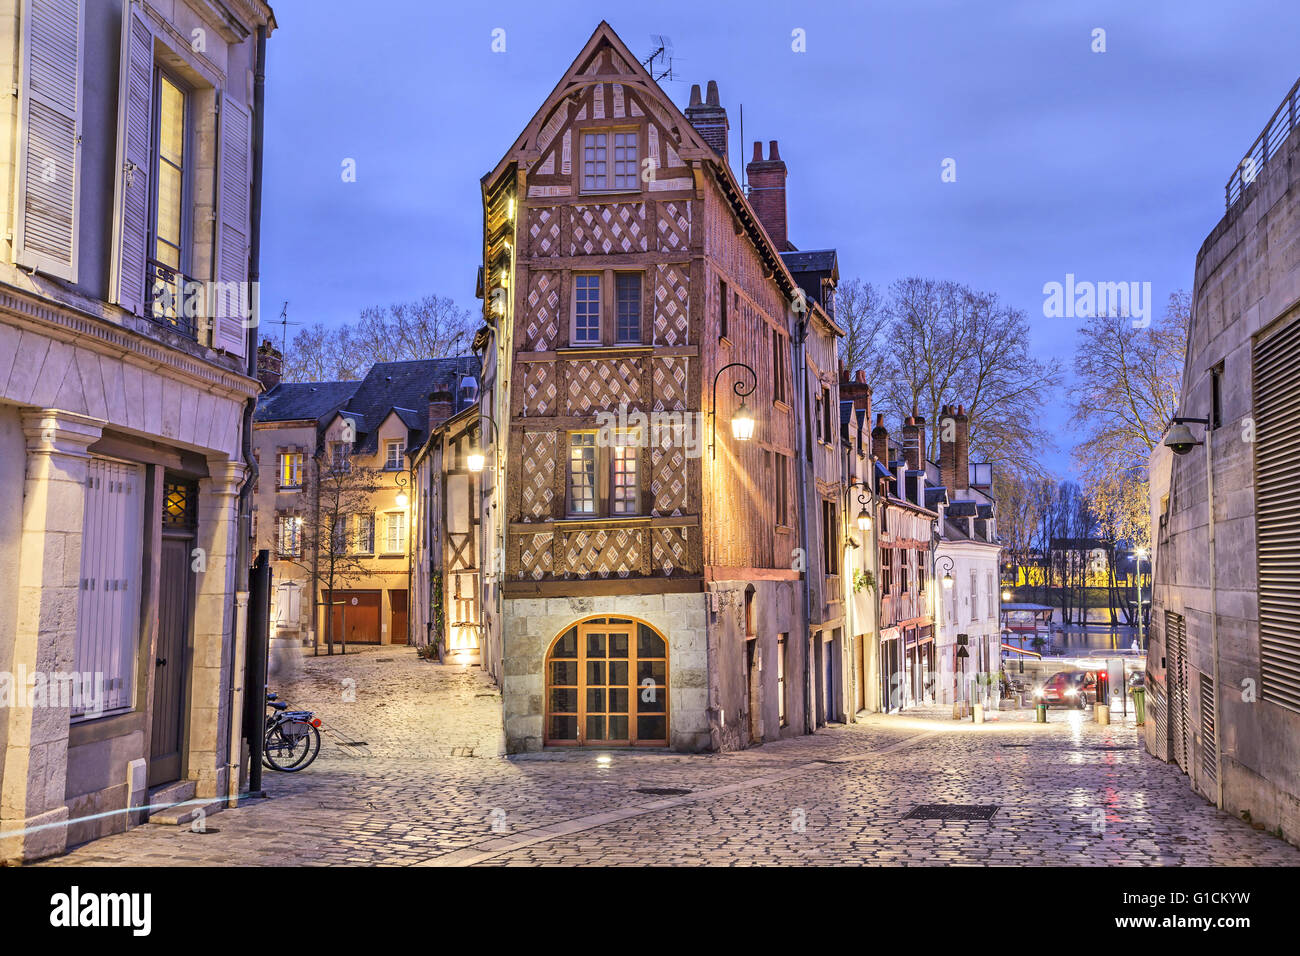 Street, paved with stone blocks and half-timbered house in the center of Orleans, France Stock Photo